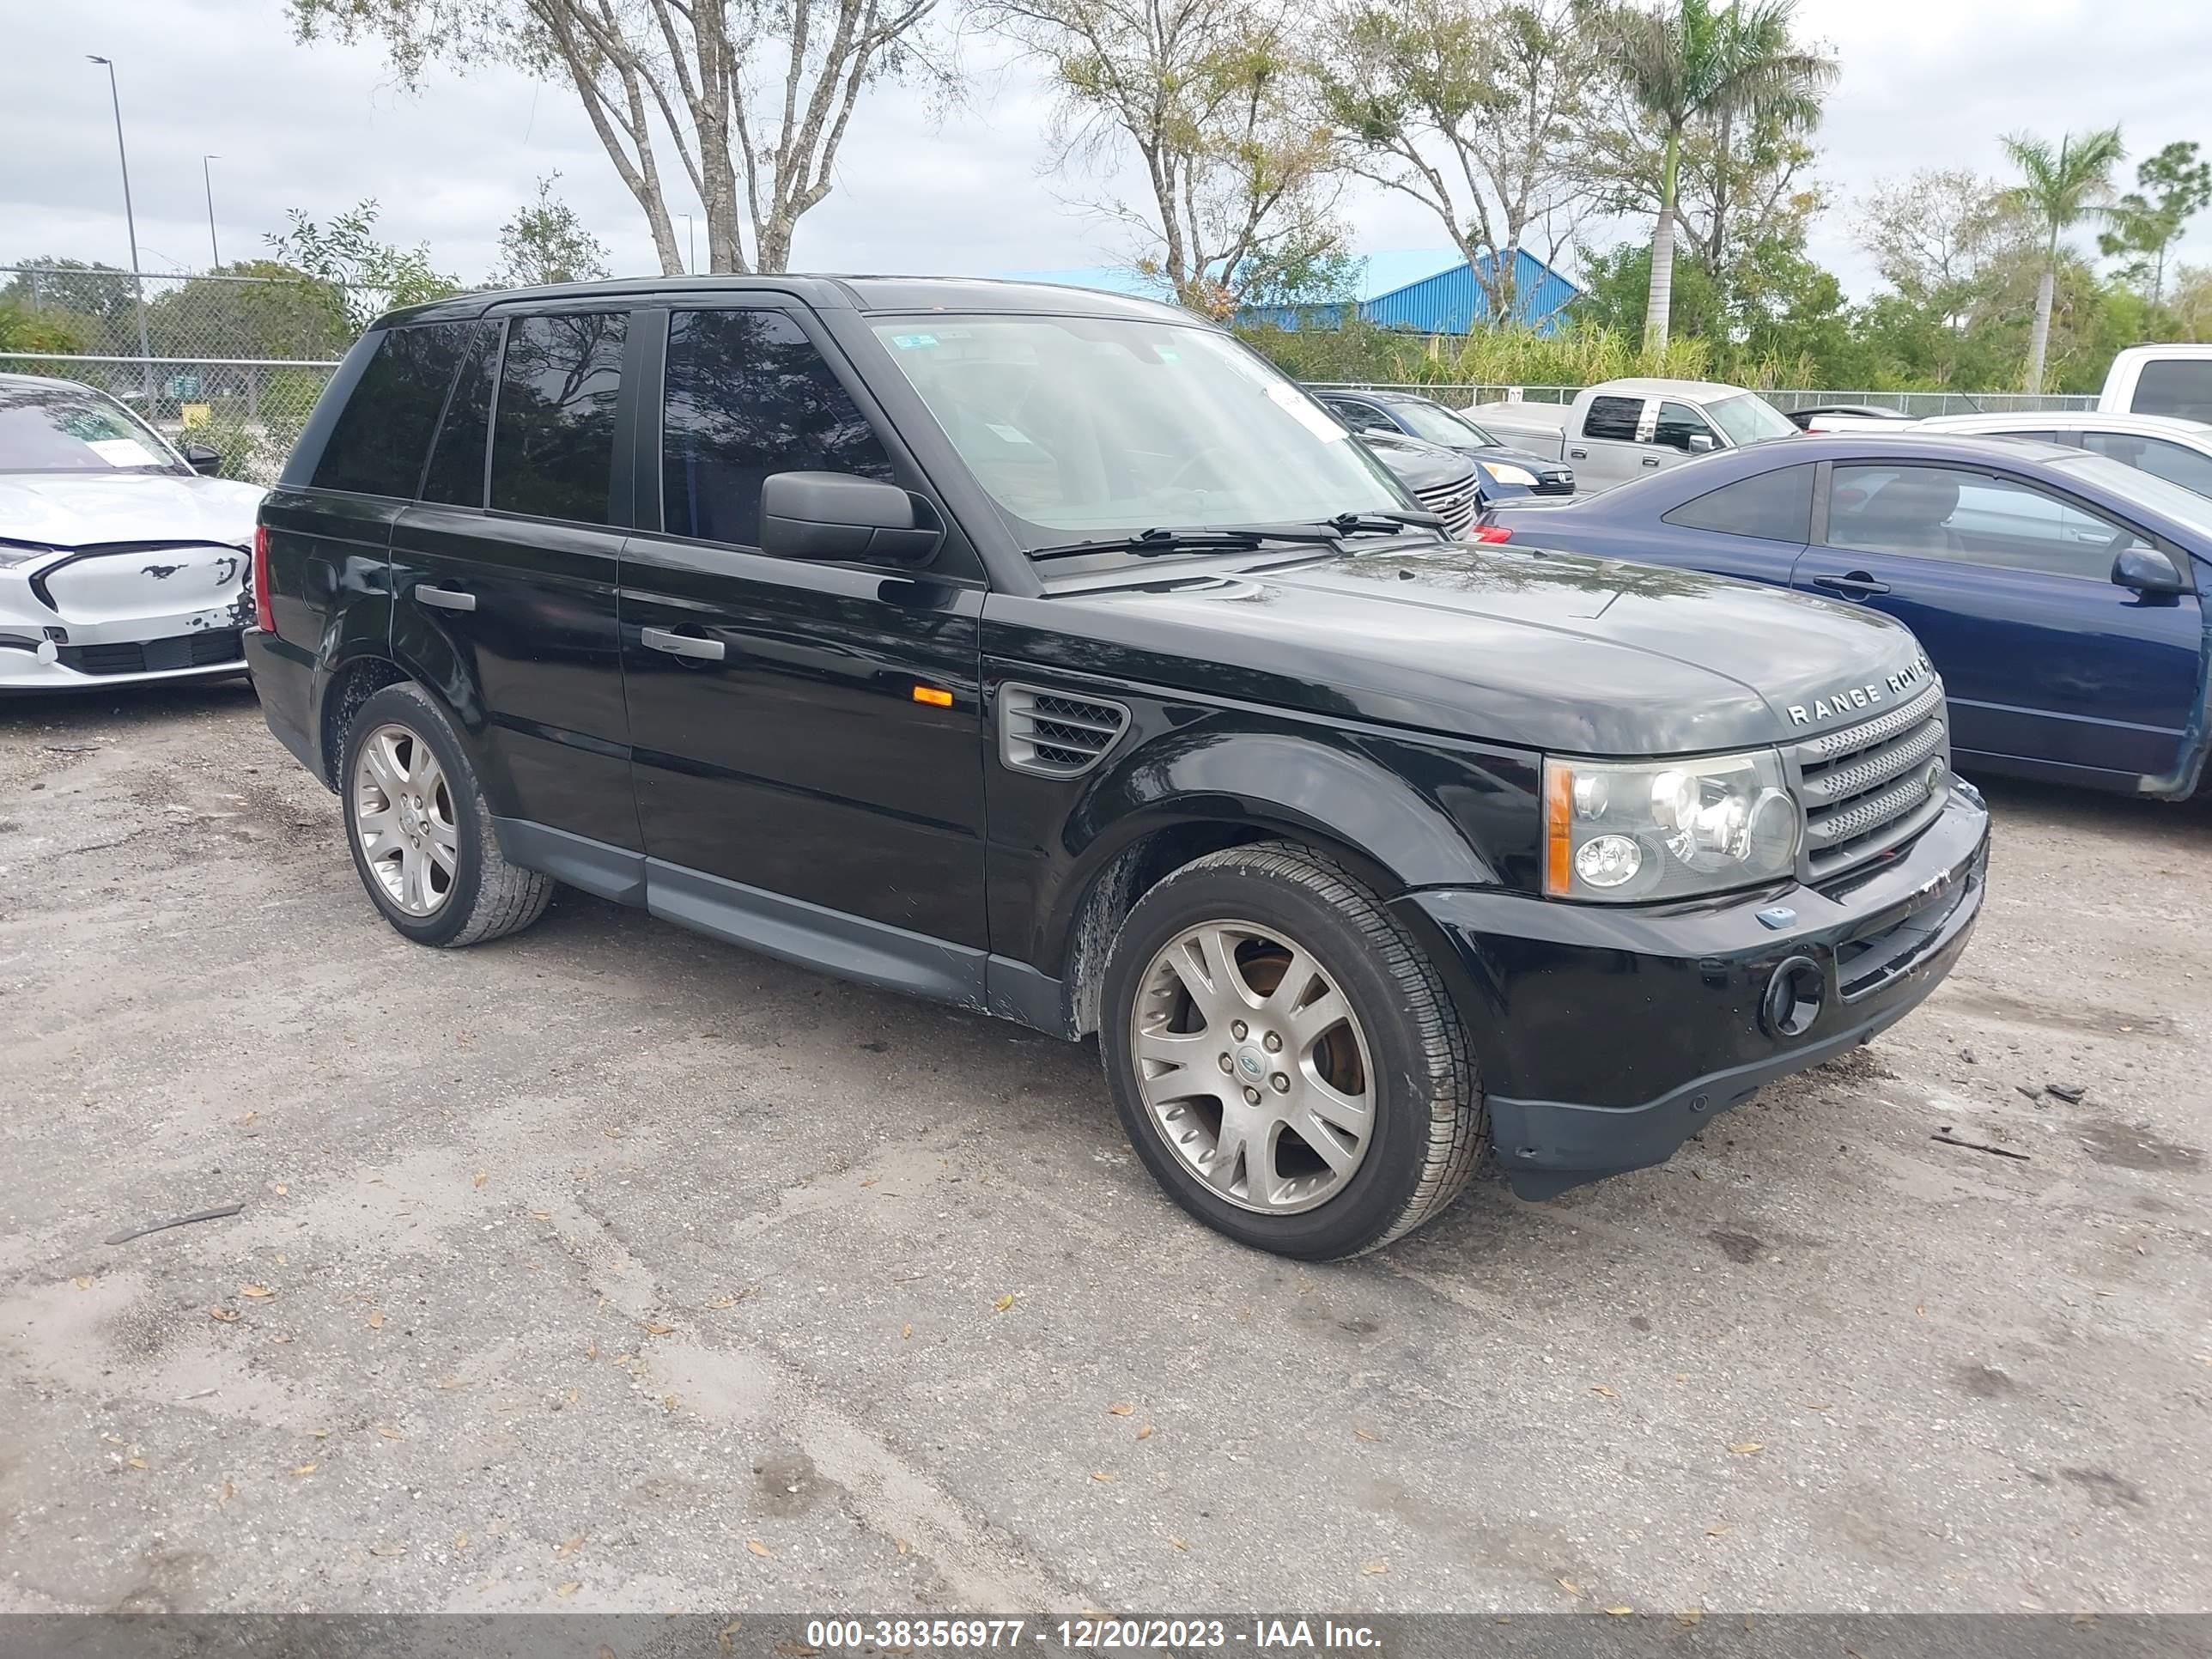 SALSF25436A904435  - LAND ROVER RANGE ROVER SPORT  2006 IMG - 0